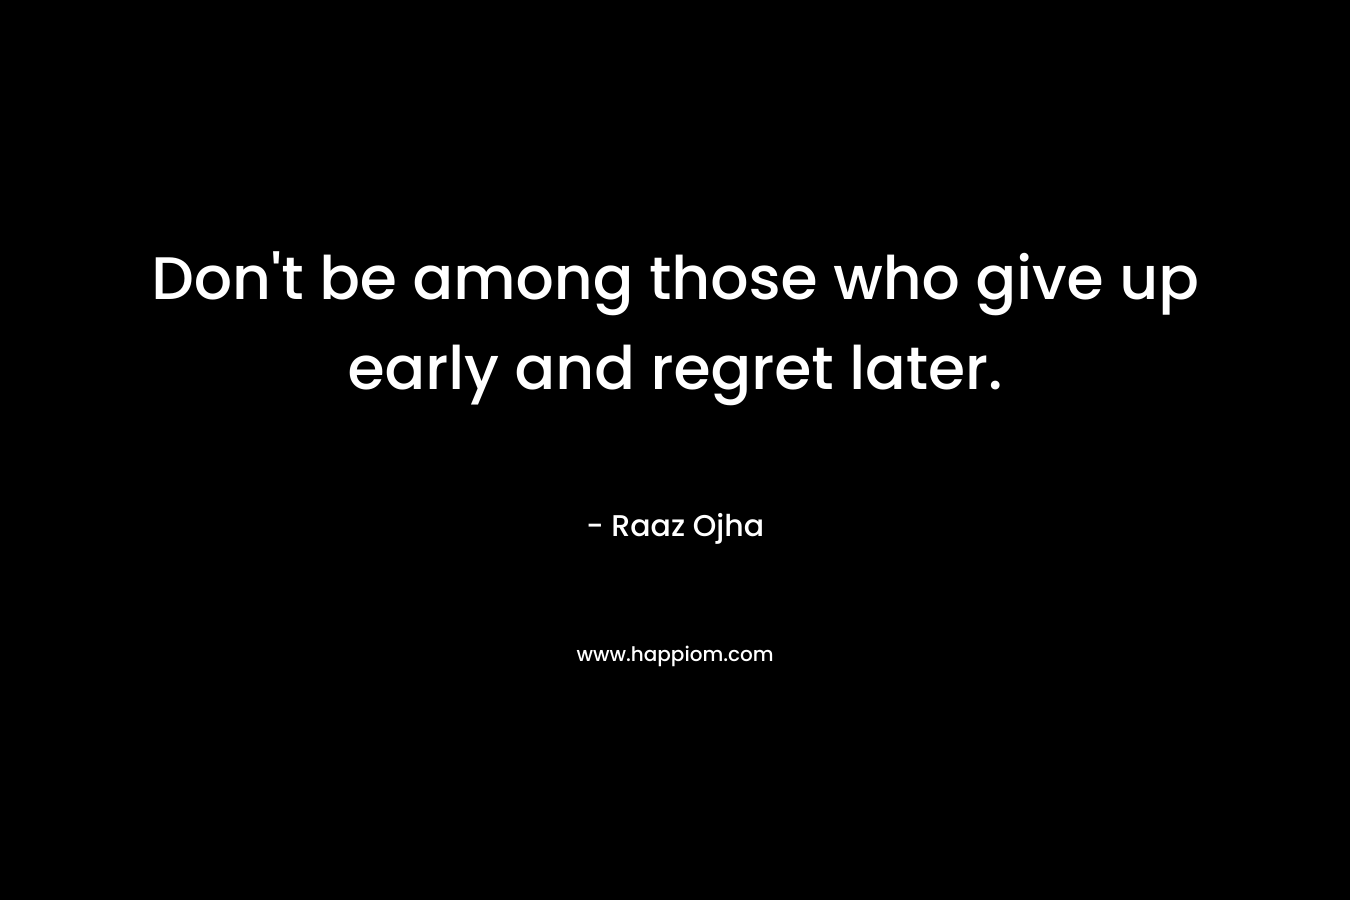 Don't be among those who give up early and regret later.